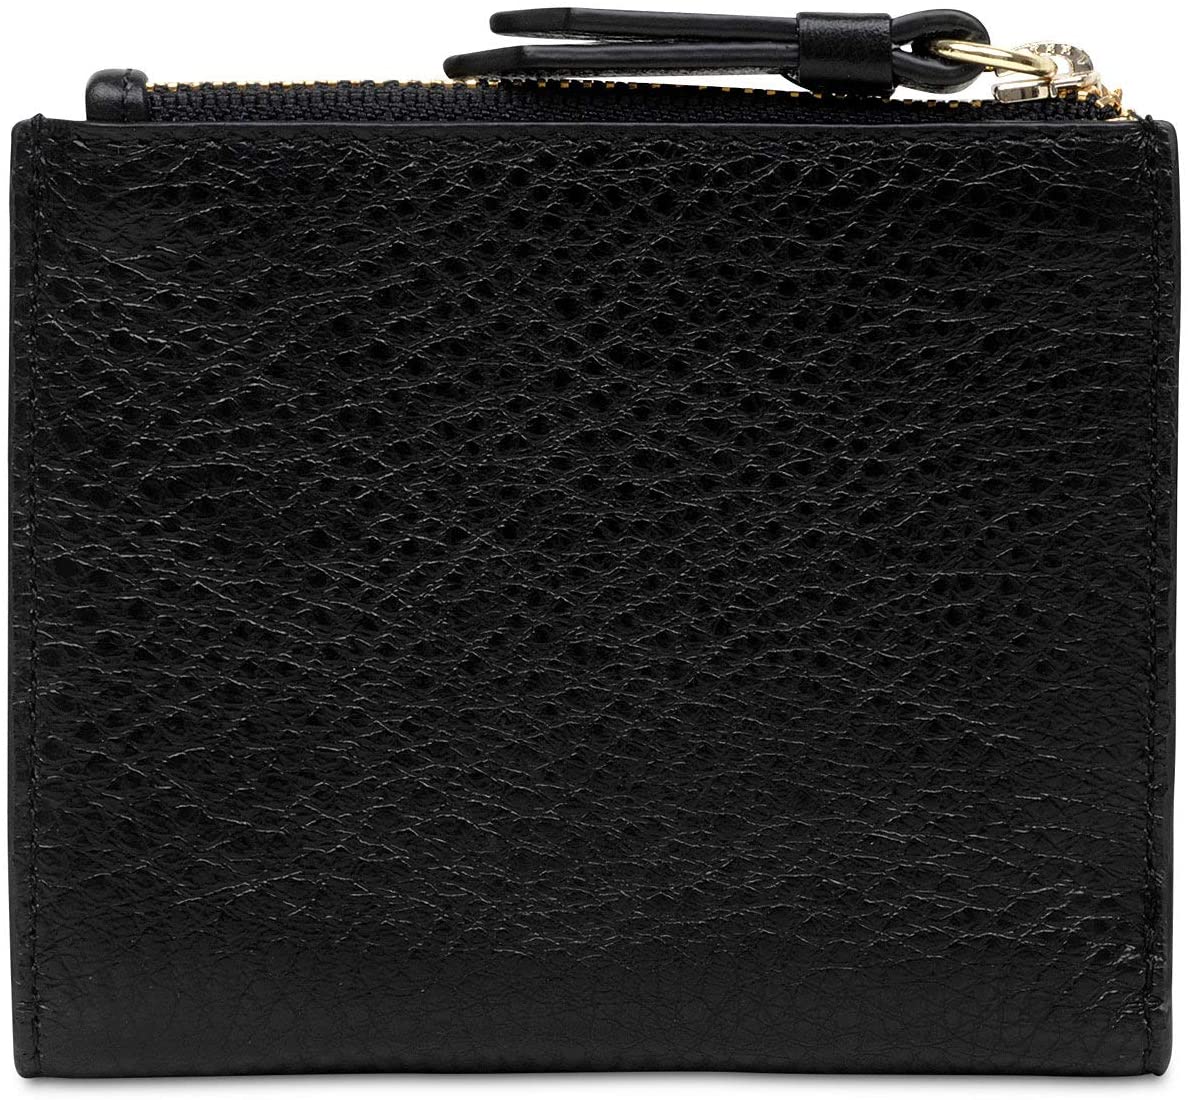 RADLEY Womens Clifton Hill Pebble Leather Wallet